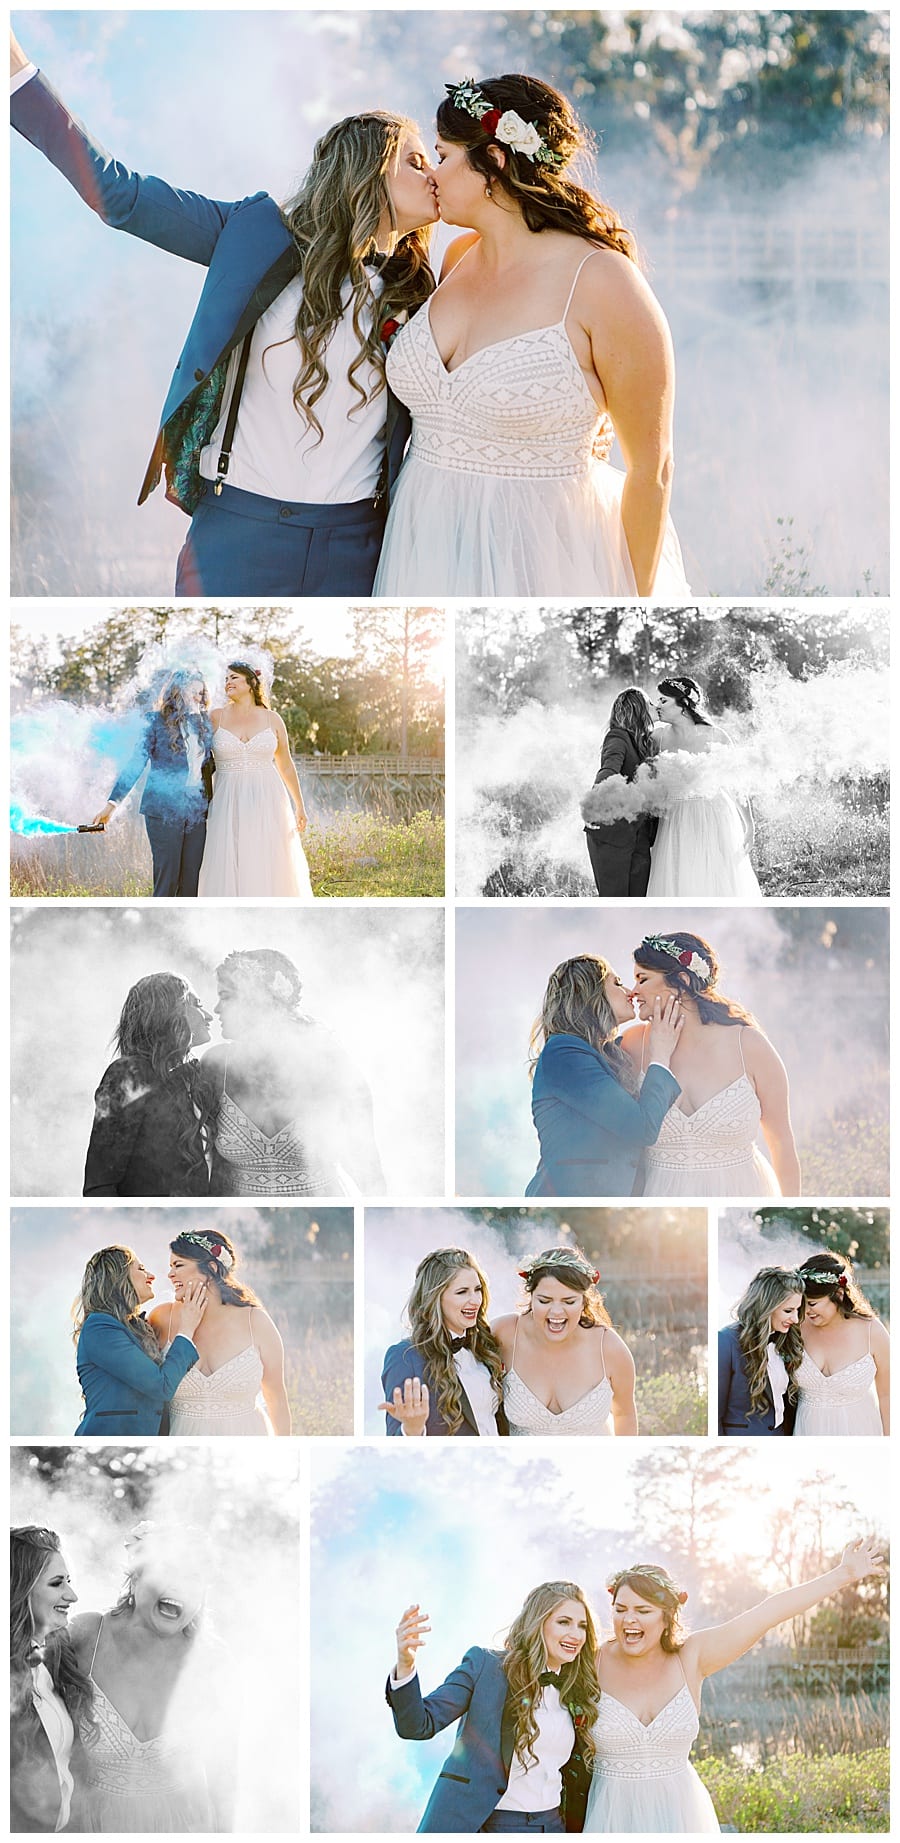 Fun LGBTQ couple portraits with smoke bombs after the wedding ceremony!